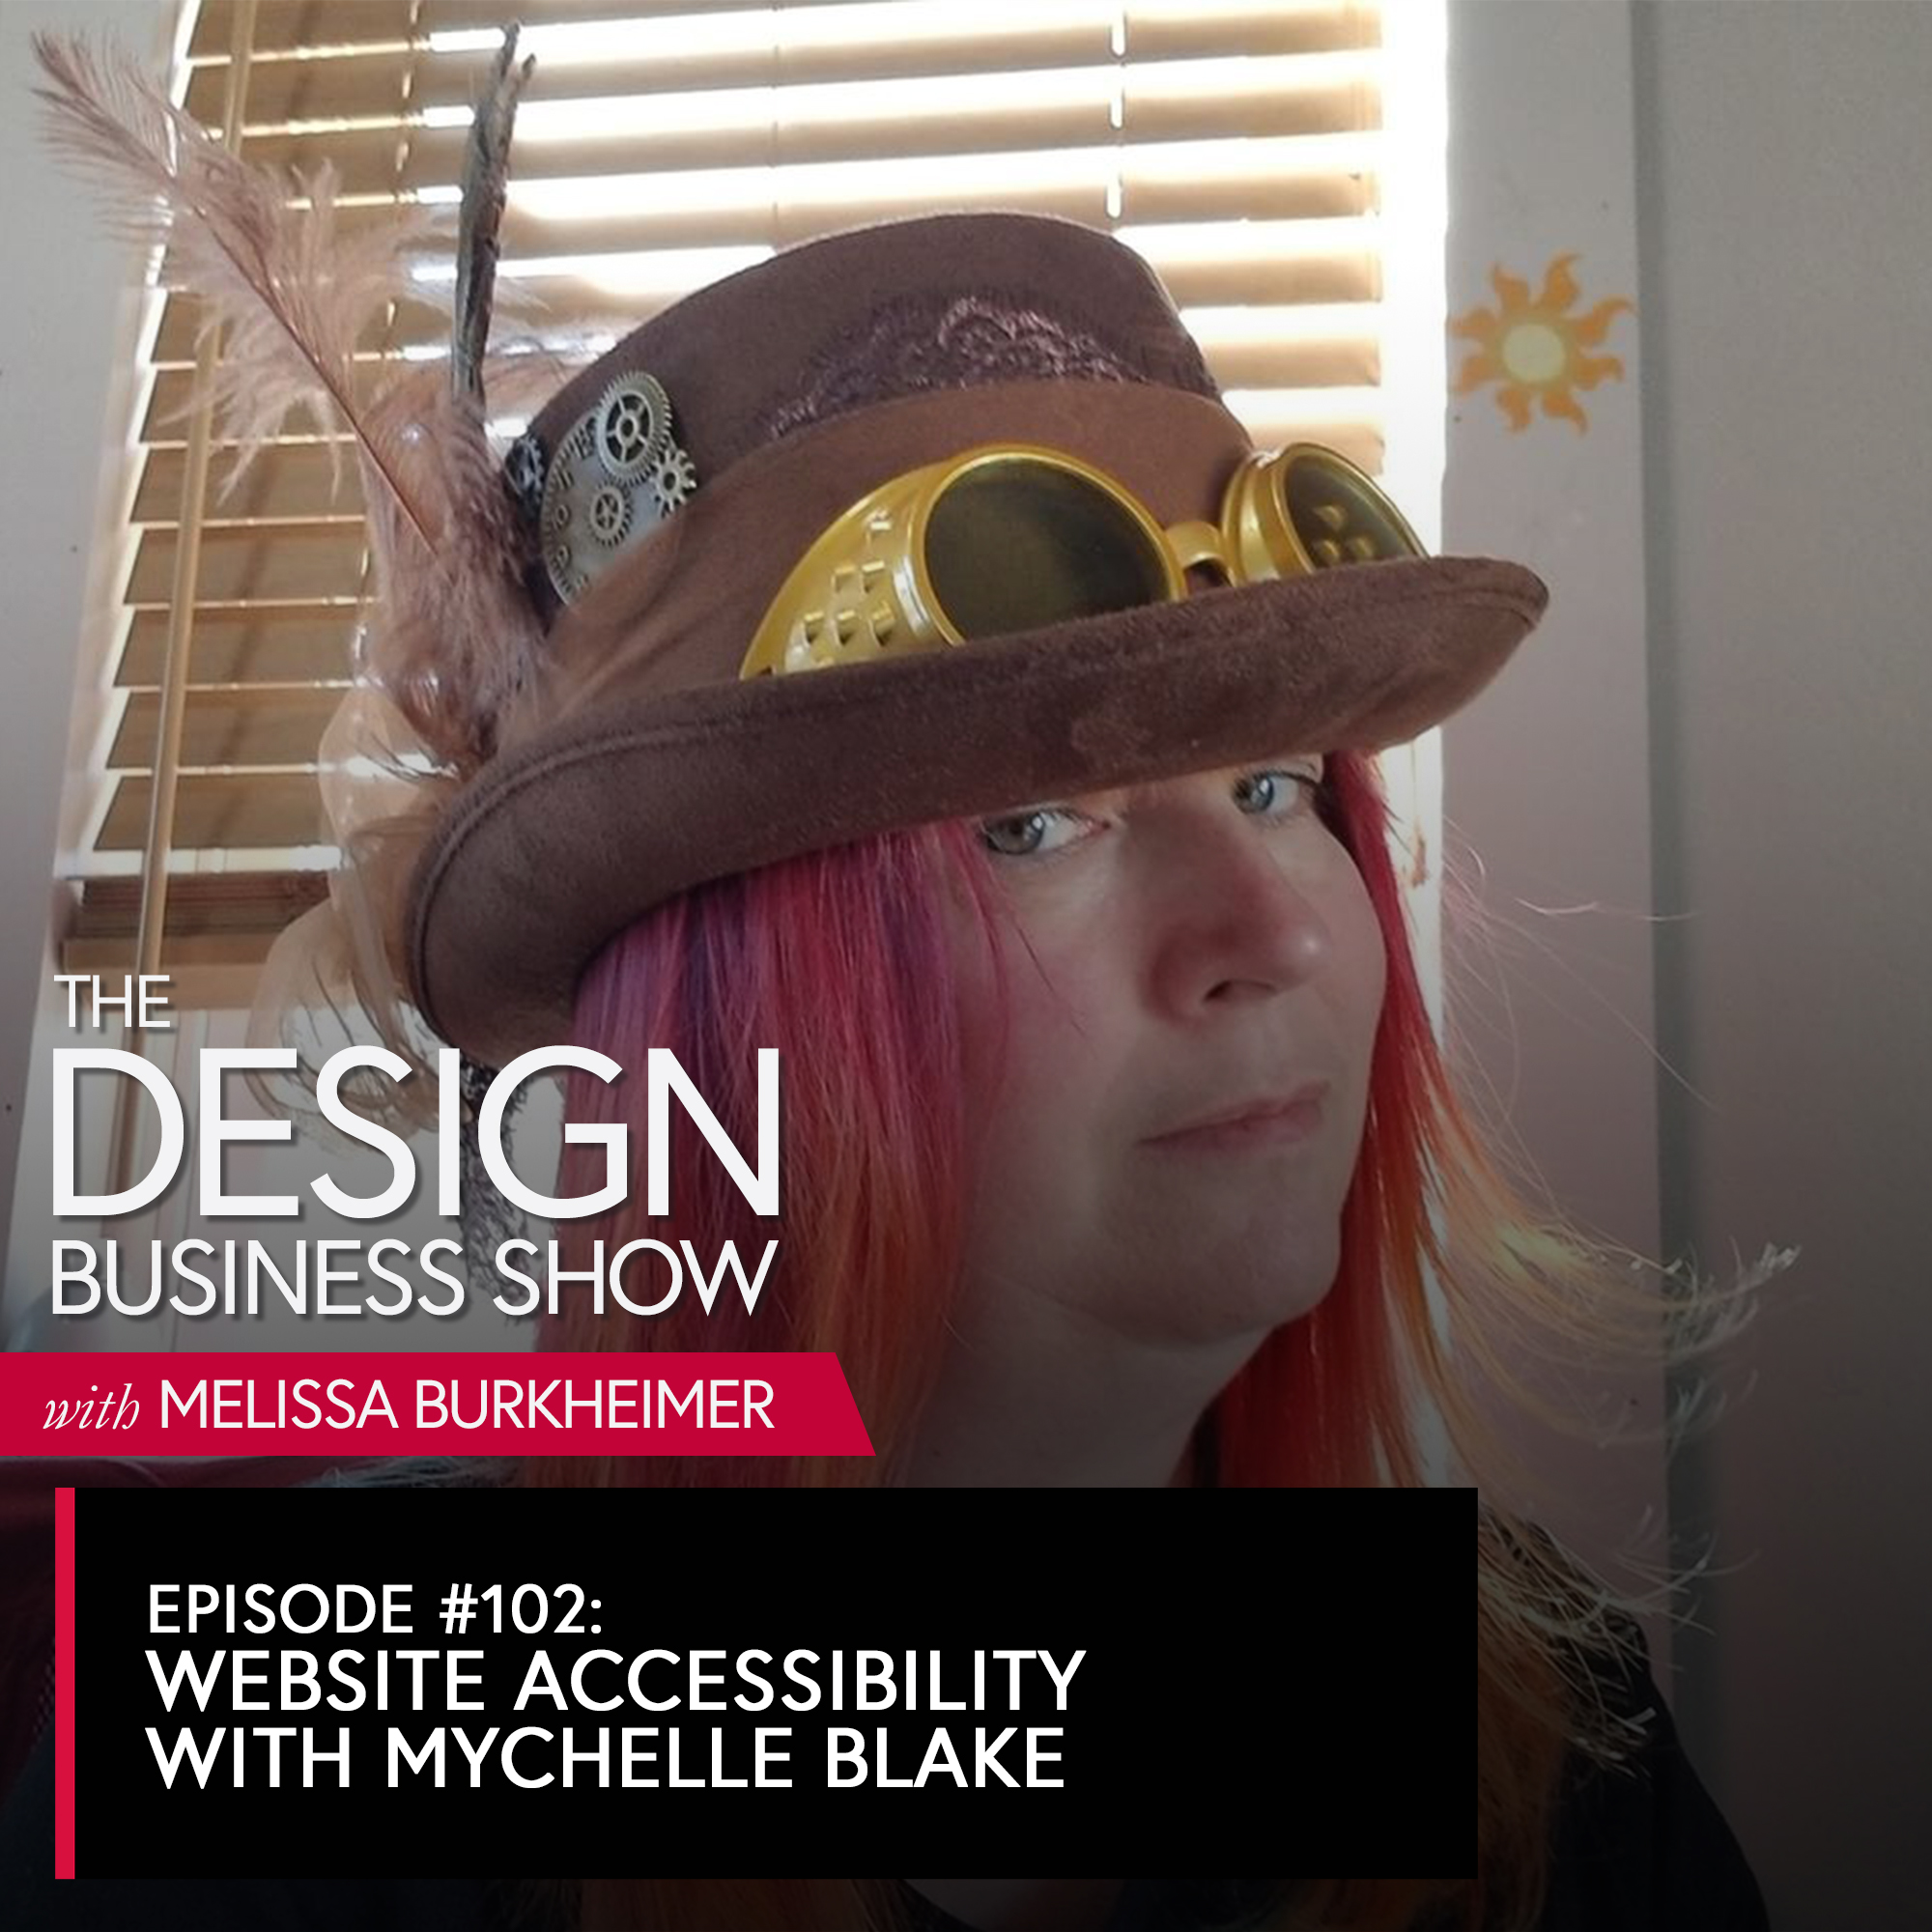 Check out episode 102 of The Design Business Show with Mychelle Blake to learn about website accessibility!